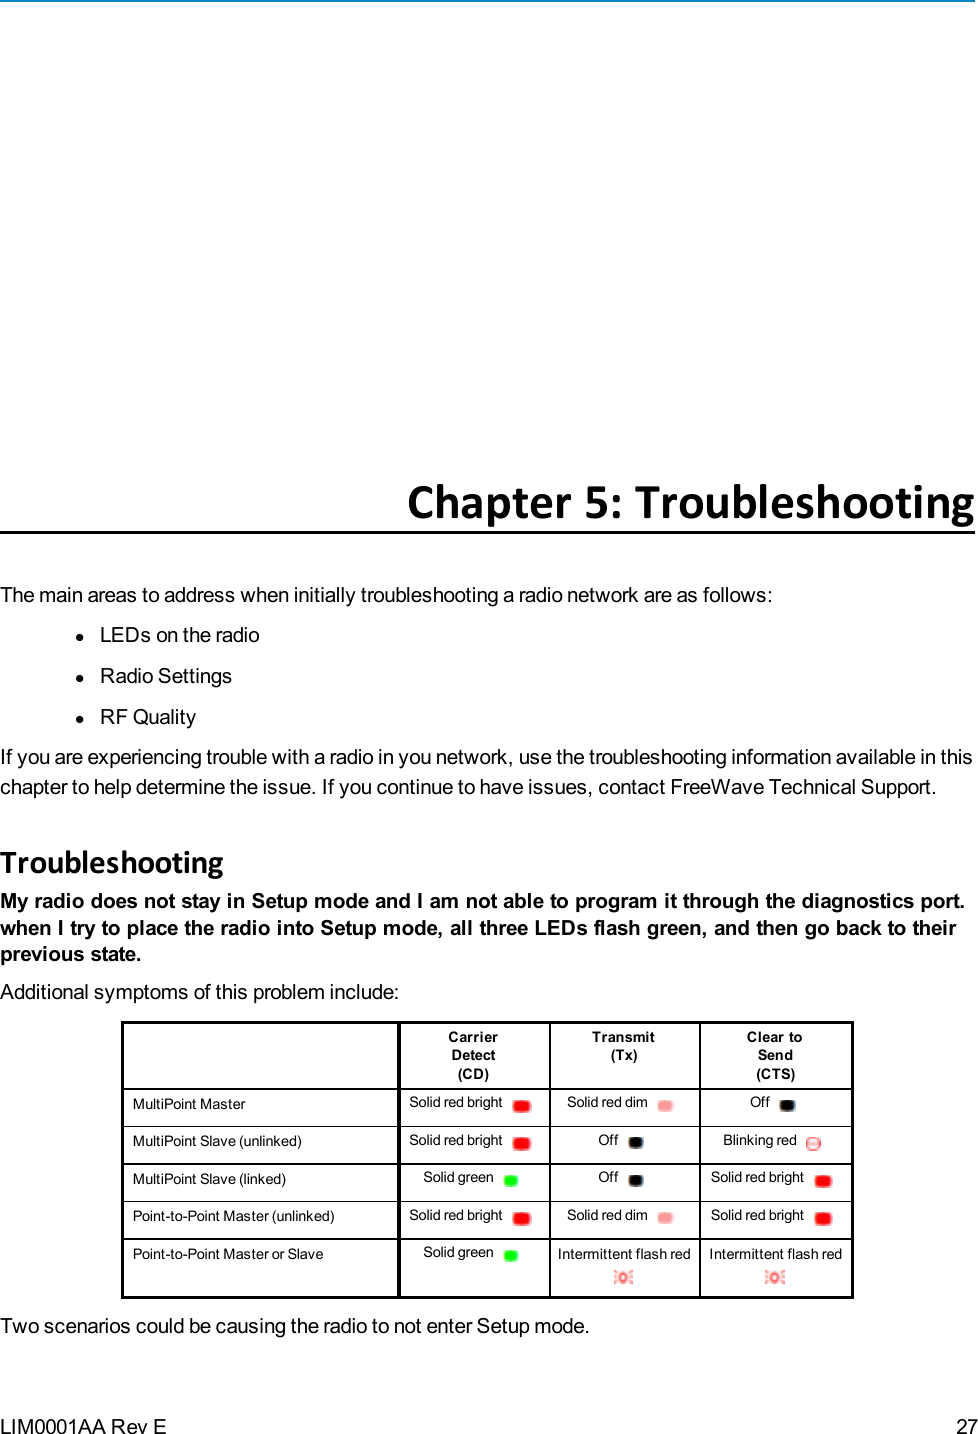 LIM0001AA Rev EChapter 5: TroubleshootingThe main areas to address when initially troubleshooting a radio network are as follows:lLEDs on the radiolRadio SettingslRF QualityIf you are experiencing trouble with a radio in you network, use the troubleshooting information available in thischapter to help determine the issue. If you continue to have issues, contact FreeWave Technical Support.TroubleshootingMy radio does not stay in Setup mode and I am not able to program it through the diagnostics port.when I try to place the radio into Setup mode, all three LEDs flash green, and then go back to theirprevious state.Additional symptoms of this problem include:CarrierDetect(CD)Transmit(Tx)Clear toSend(CTS)MultiPoint Master Solid red bright Solid red dim OffMultiPoint Slave (unlinked) Solid red bright Off Blinking redMultiPoint Slave (linked) Solid green Off Solid red brightPoint-to-Point Master (unlinked) Solid red bright Solid red dim Solid red brightPoint-to-Point Master or Slave Solid green Intermittent flash red Intermittent flash redTwo scenarios could be causing the radio to not enter Setup mode.27